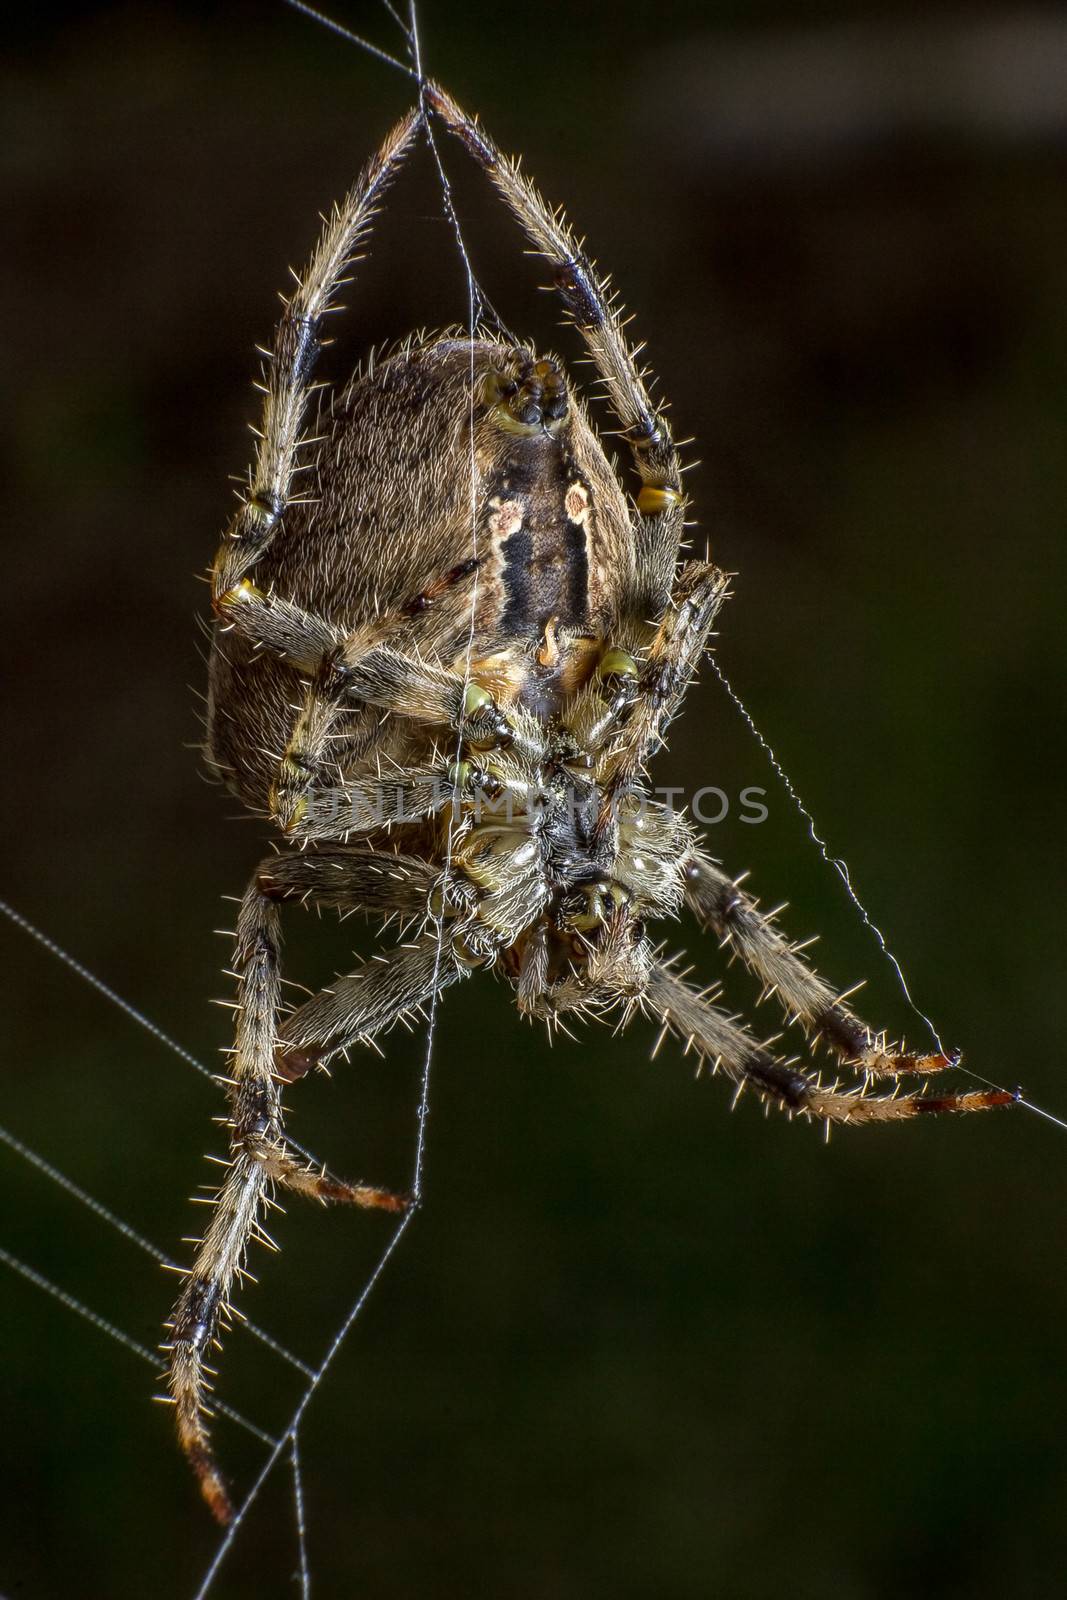 Spider on the web by dynamicfoto